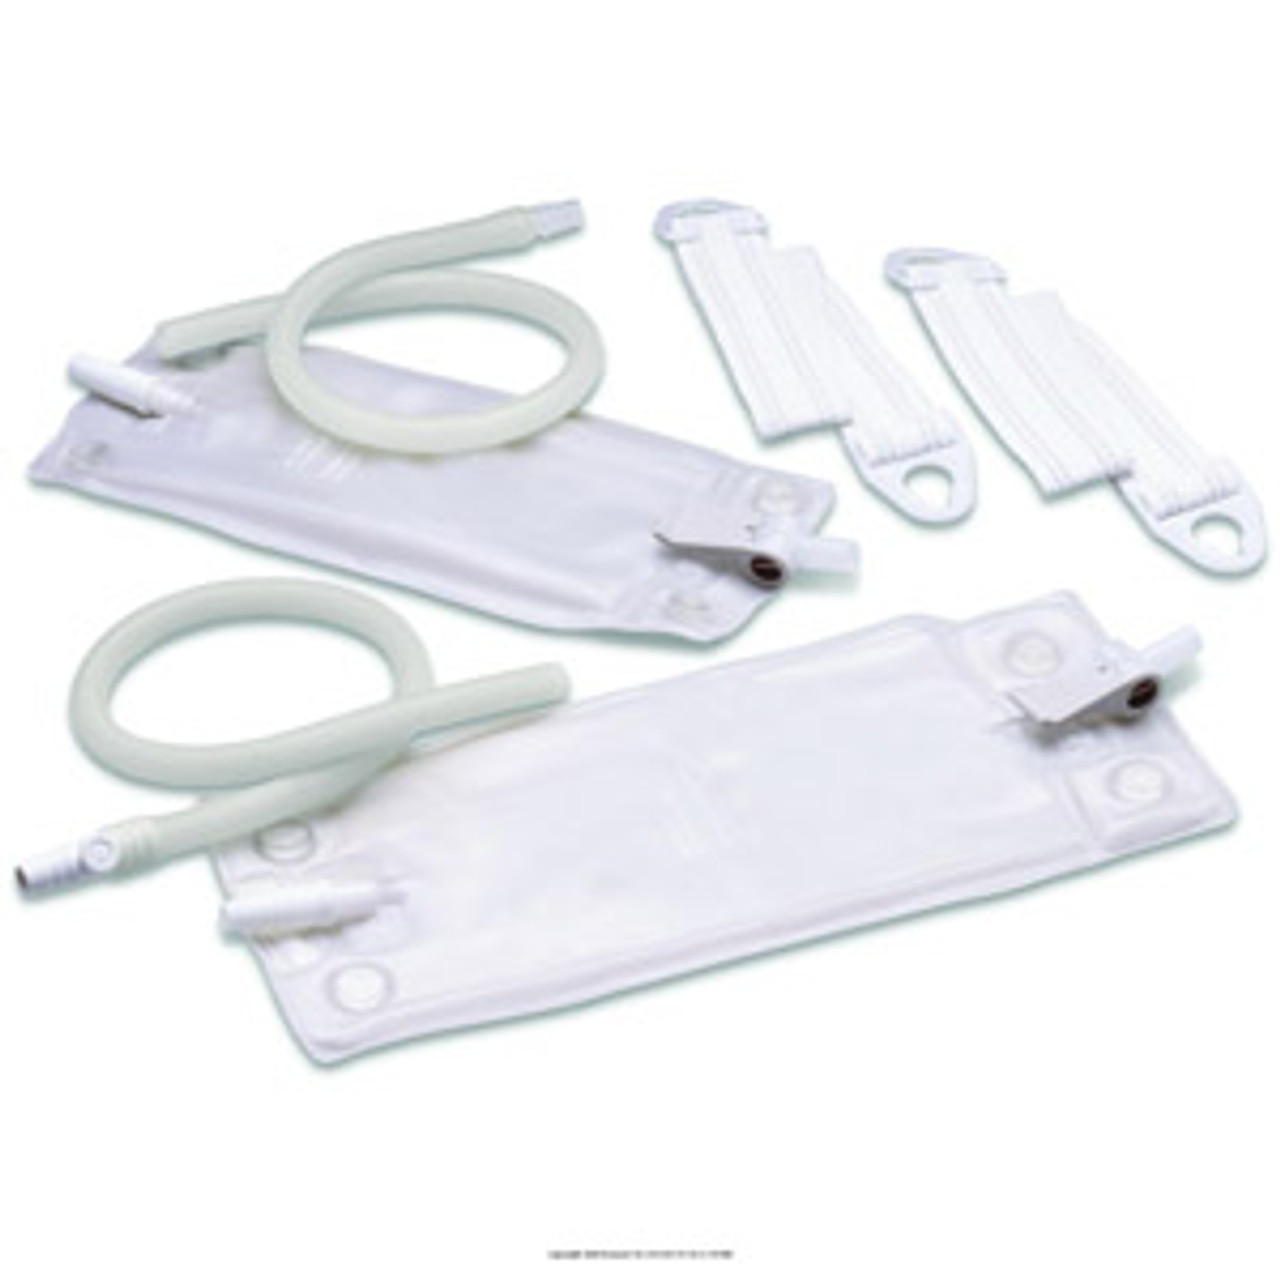 Vented Latex-Free Urinary Leg Bag Combination Pack